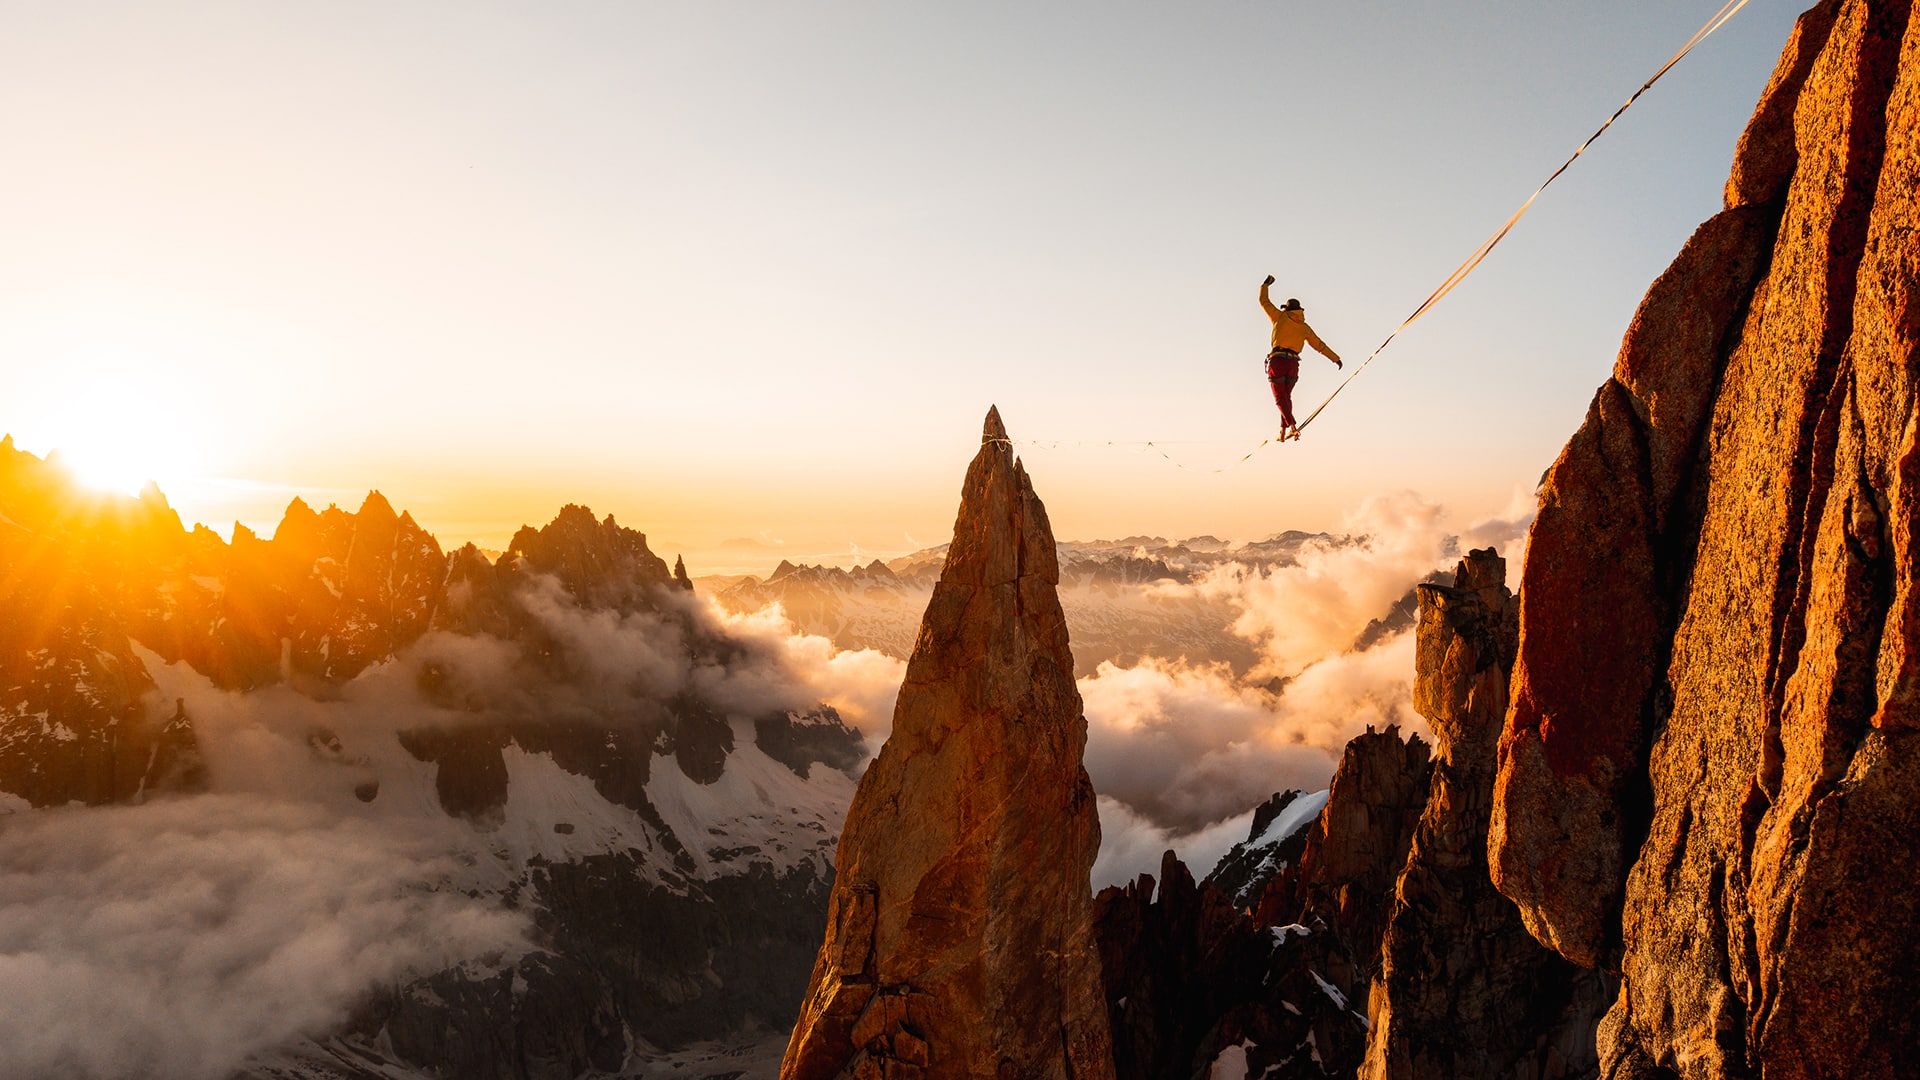 A figure walks across a tightrope, seemingly in mid-air in a mountain landscape. Picture by Antoine Mesnage